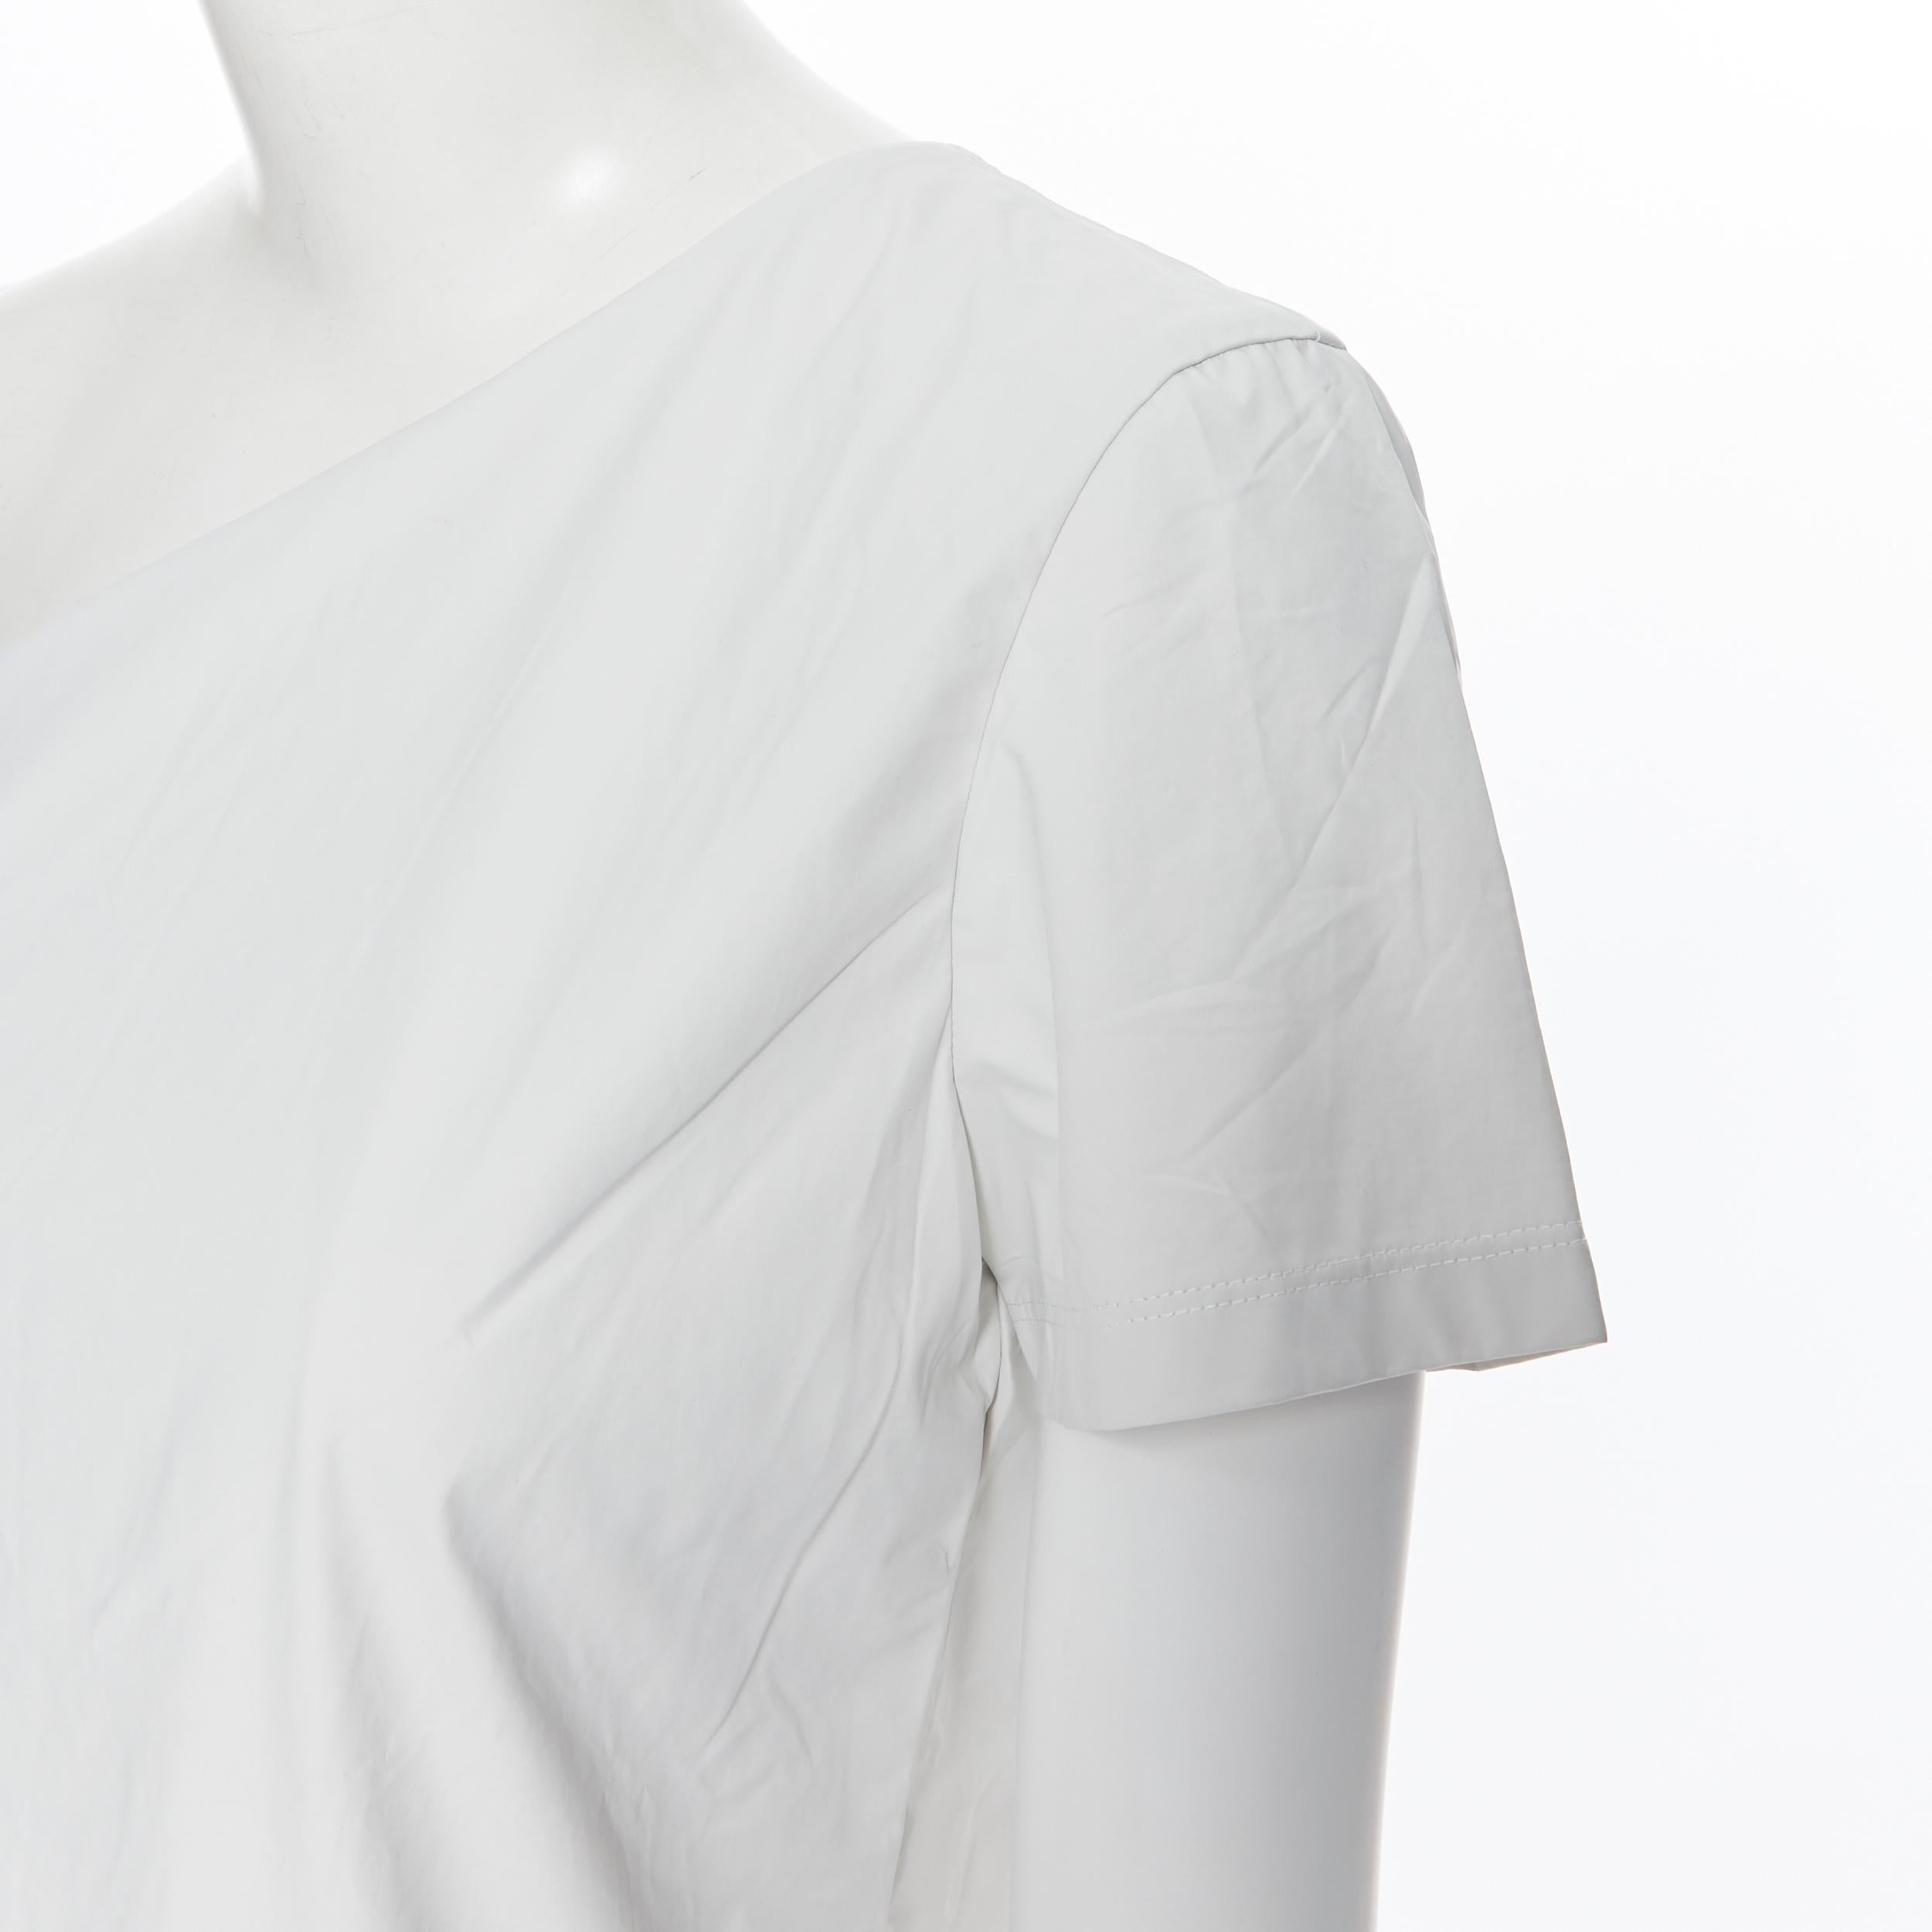 new MAX MARA white coated cotton one shoulder asymmetric top S 
Brand: Max Mara
Model Name / Style: One shoulder top
Material: Cotton
Color: White
Pattern: Solid
Extra Detail: Coated cotton fabrication. Asymmetric one shoulder neckline. Short